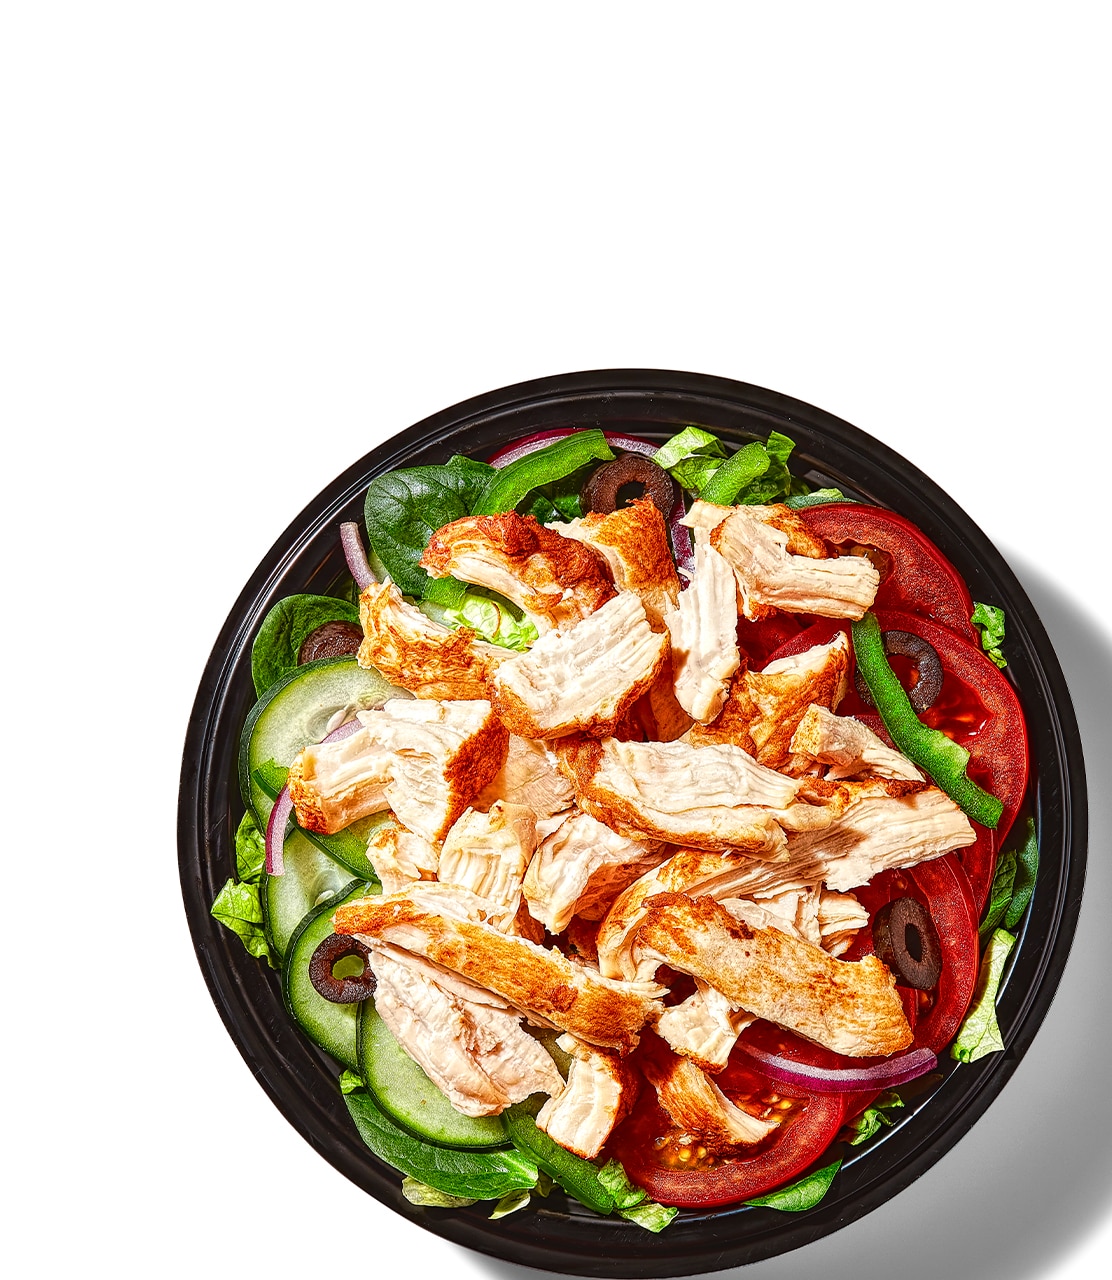 Calories in Subway Oven Roasted Chicken No Bready Bowl